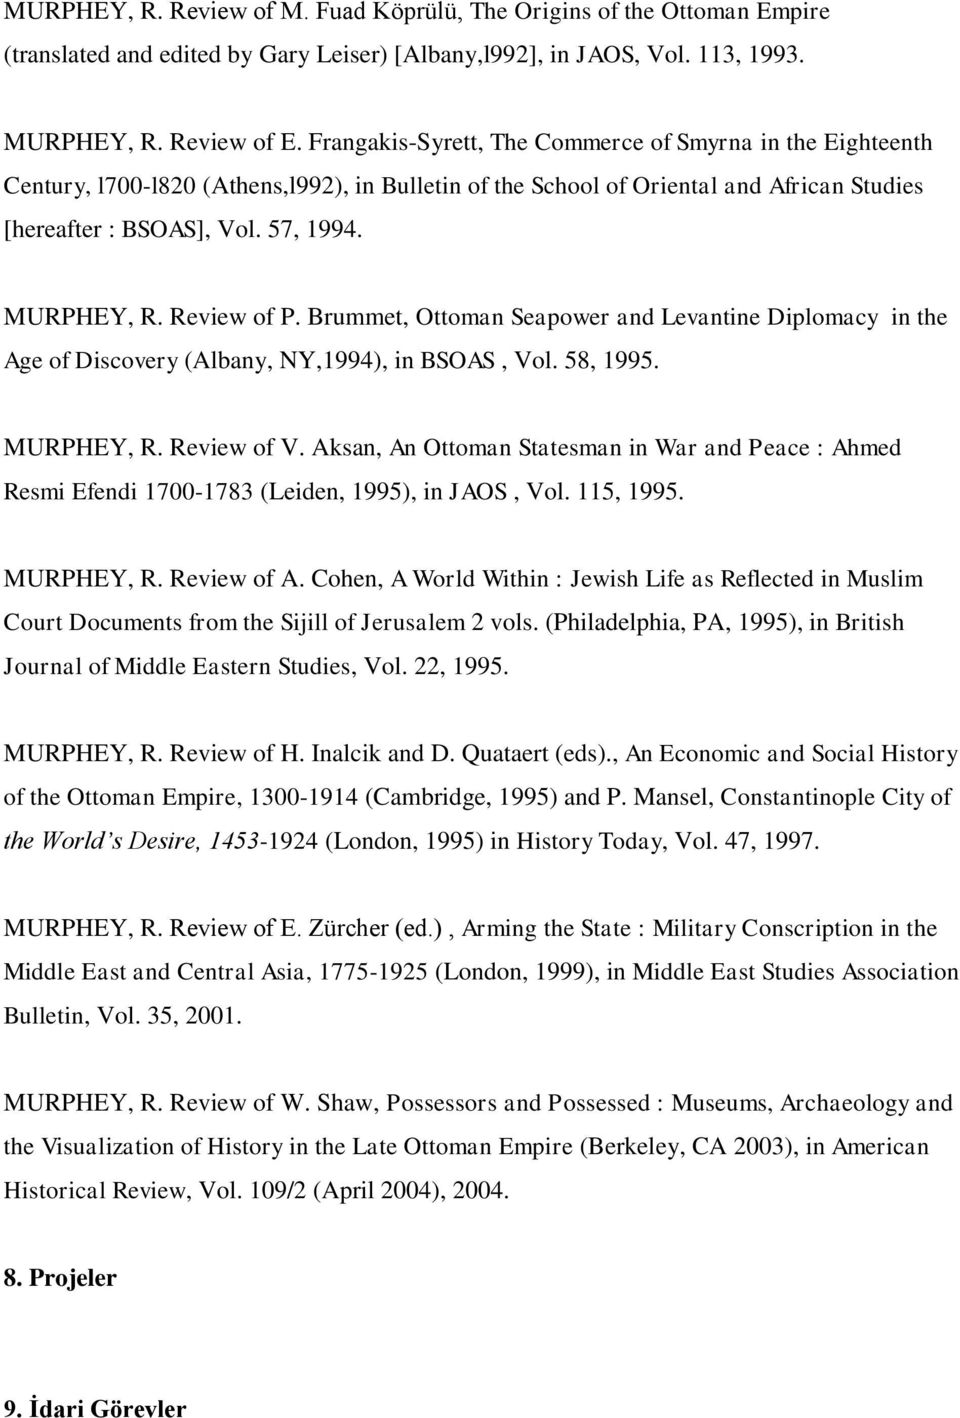 Review of P. Brummet, Ottoman Seapower and Levantine Diplomacy in the Age of Discovery (Albany, NY,1994), in BSOAS, Vol. 58, 1995. MURPHEY, R. Review of V.